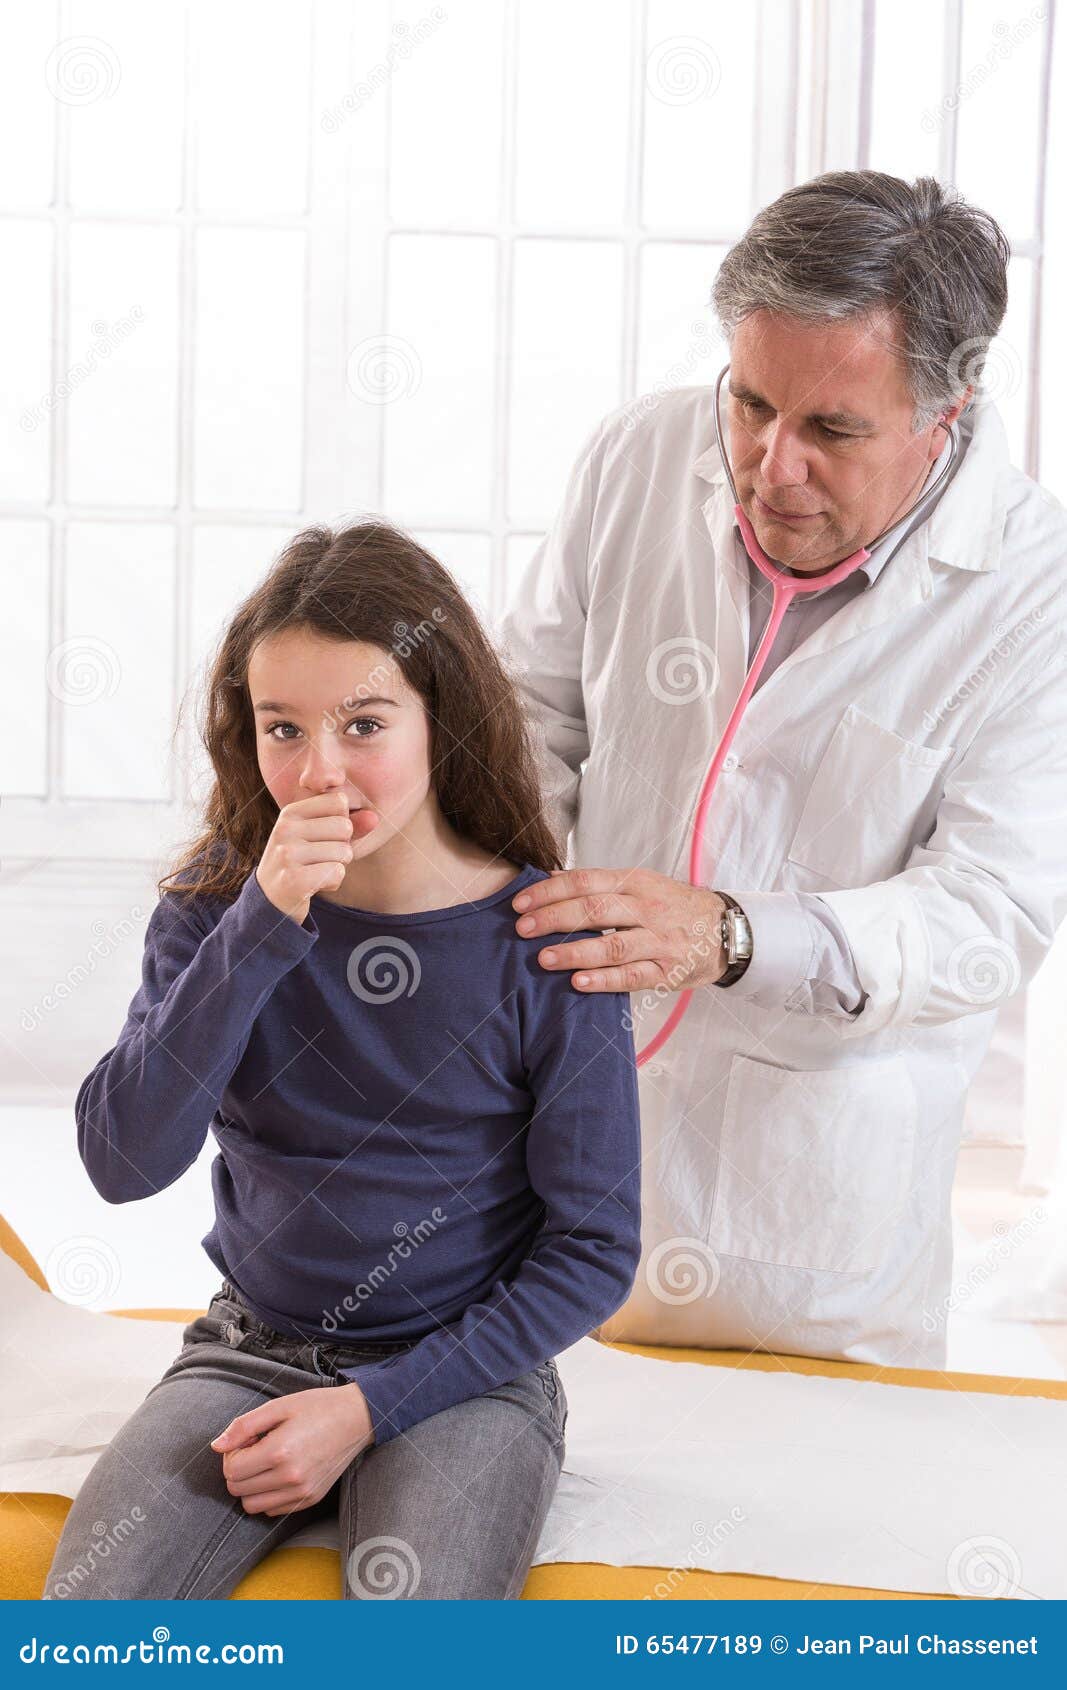 Healthcare, Medical Exam, People, Children and Stock Image - Image of doctor,  cardiology: 65477189